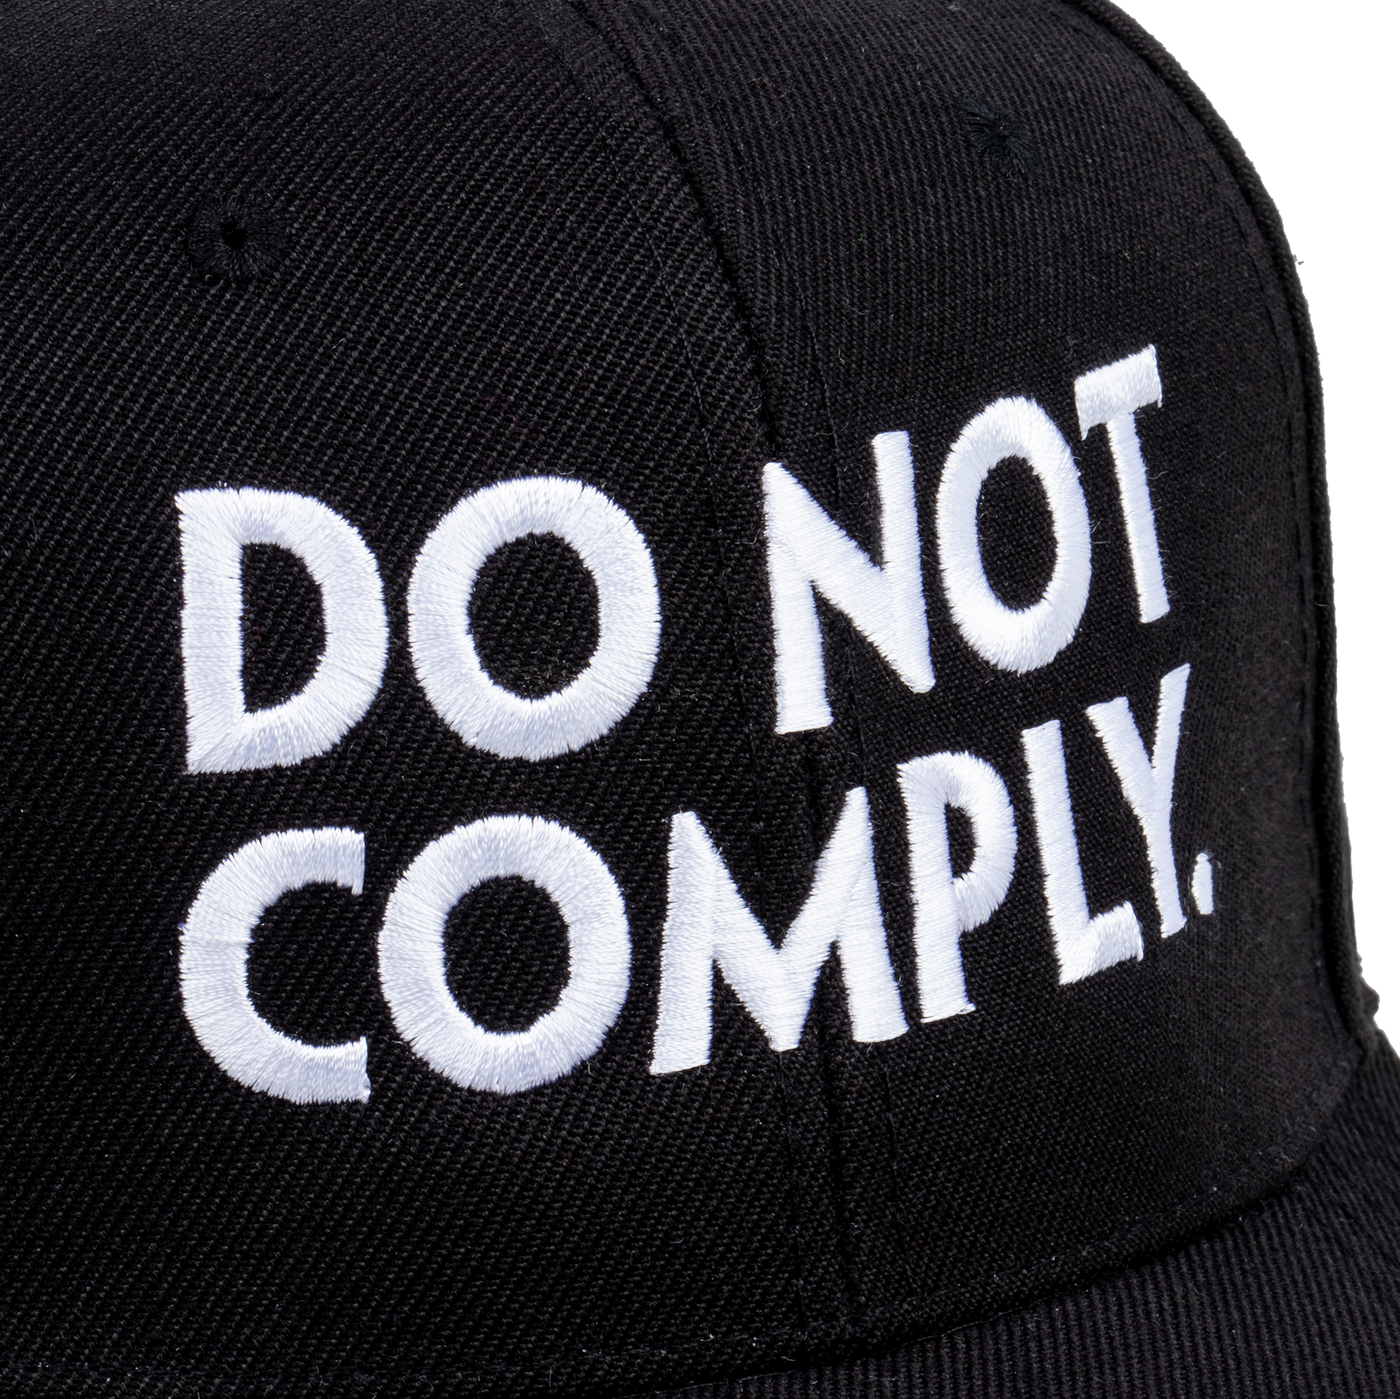 Do Not Comply Hat